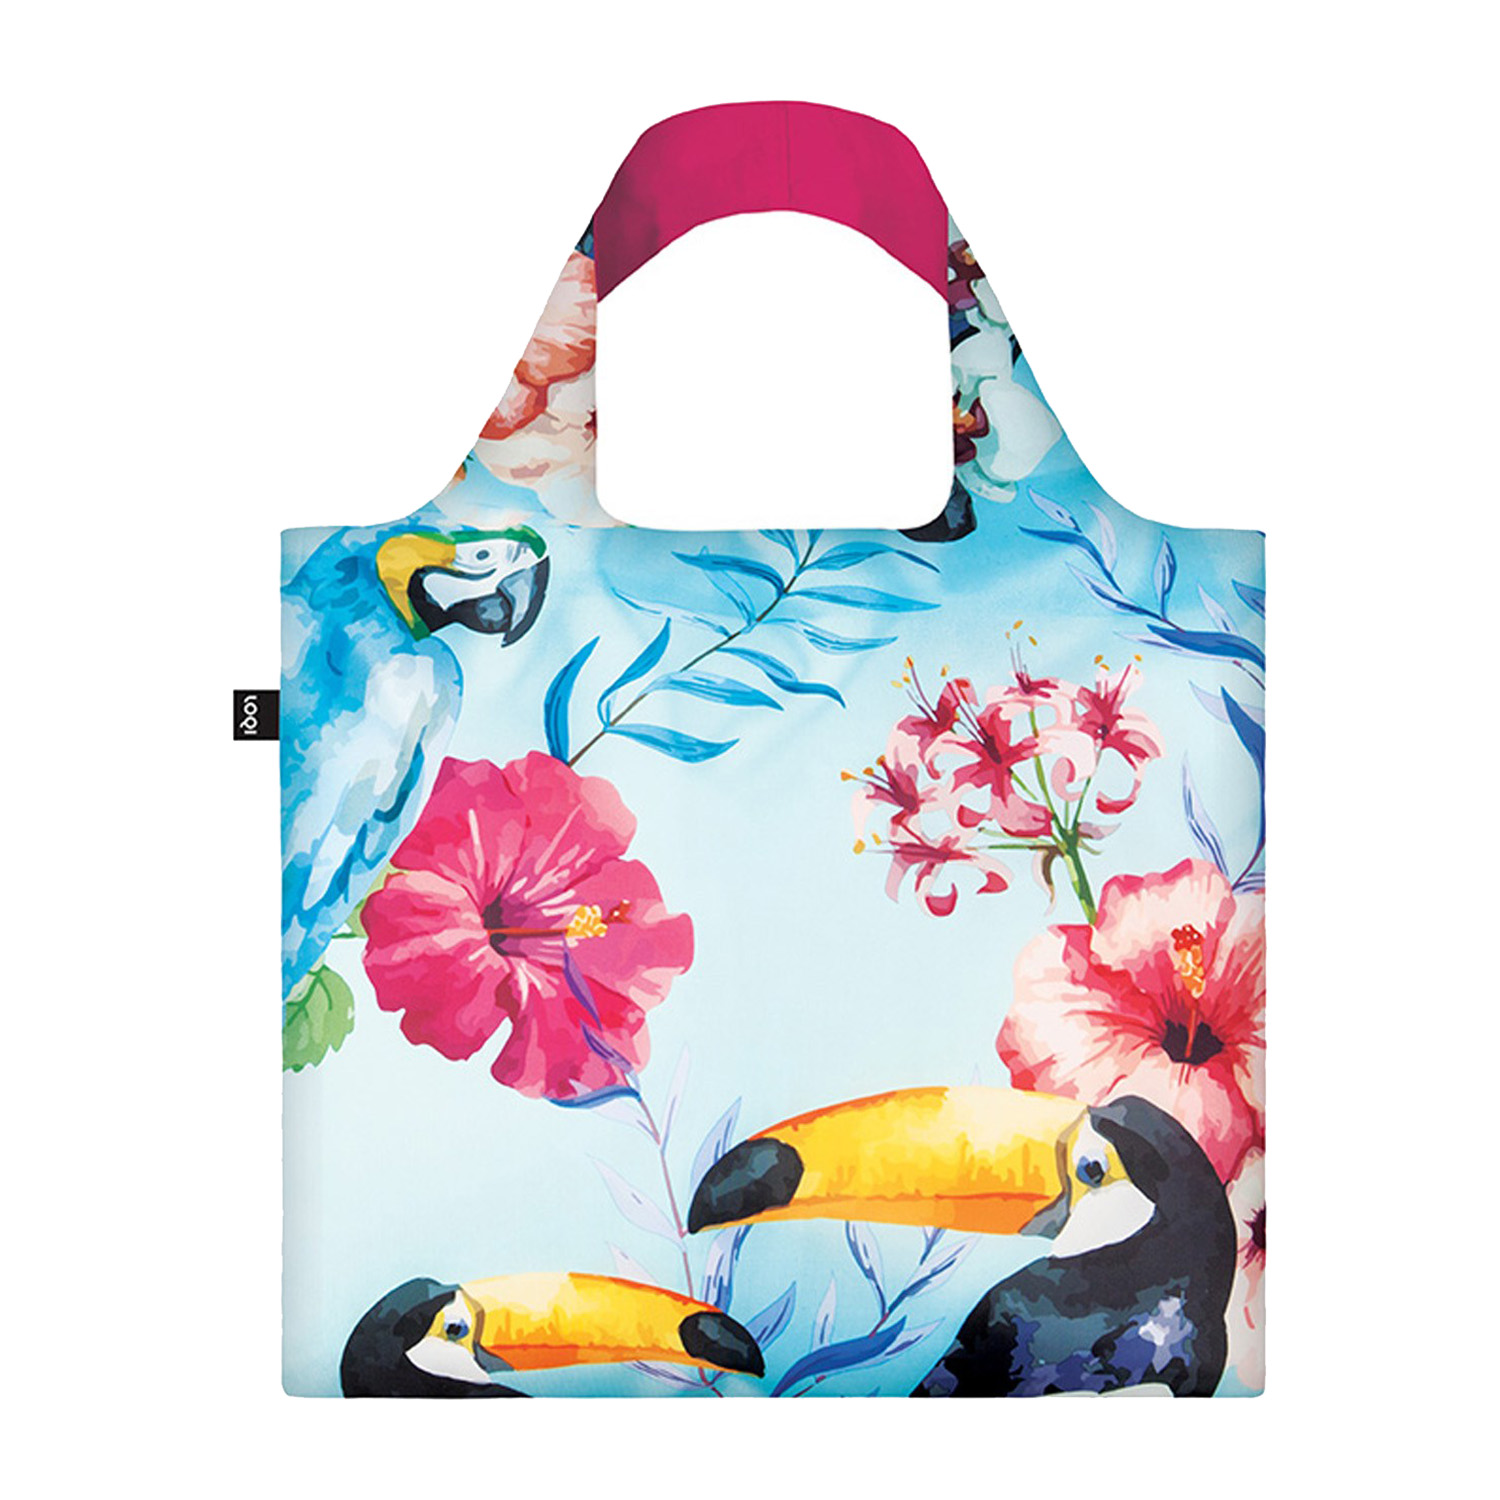 Buy LOQI Wild Foldable Tote Bag - Birds in Singapore & Malaysia - The Wallet Shop